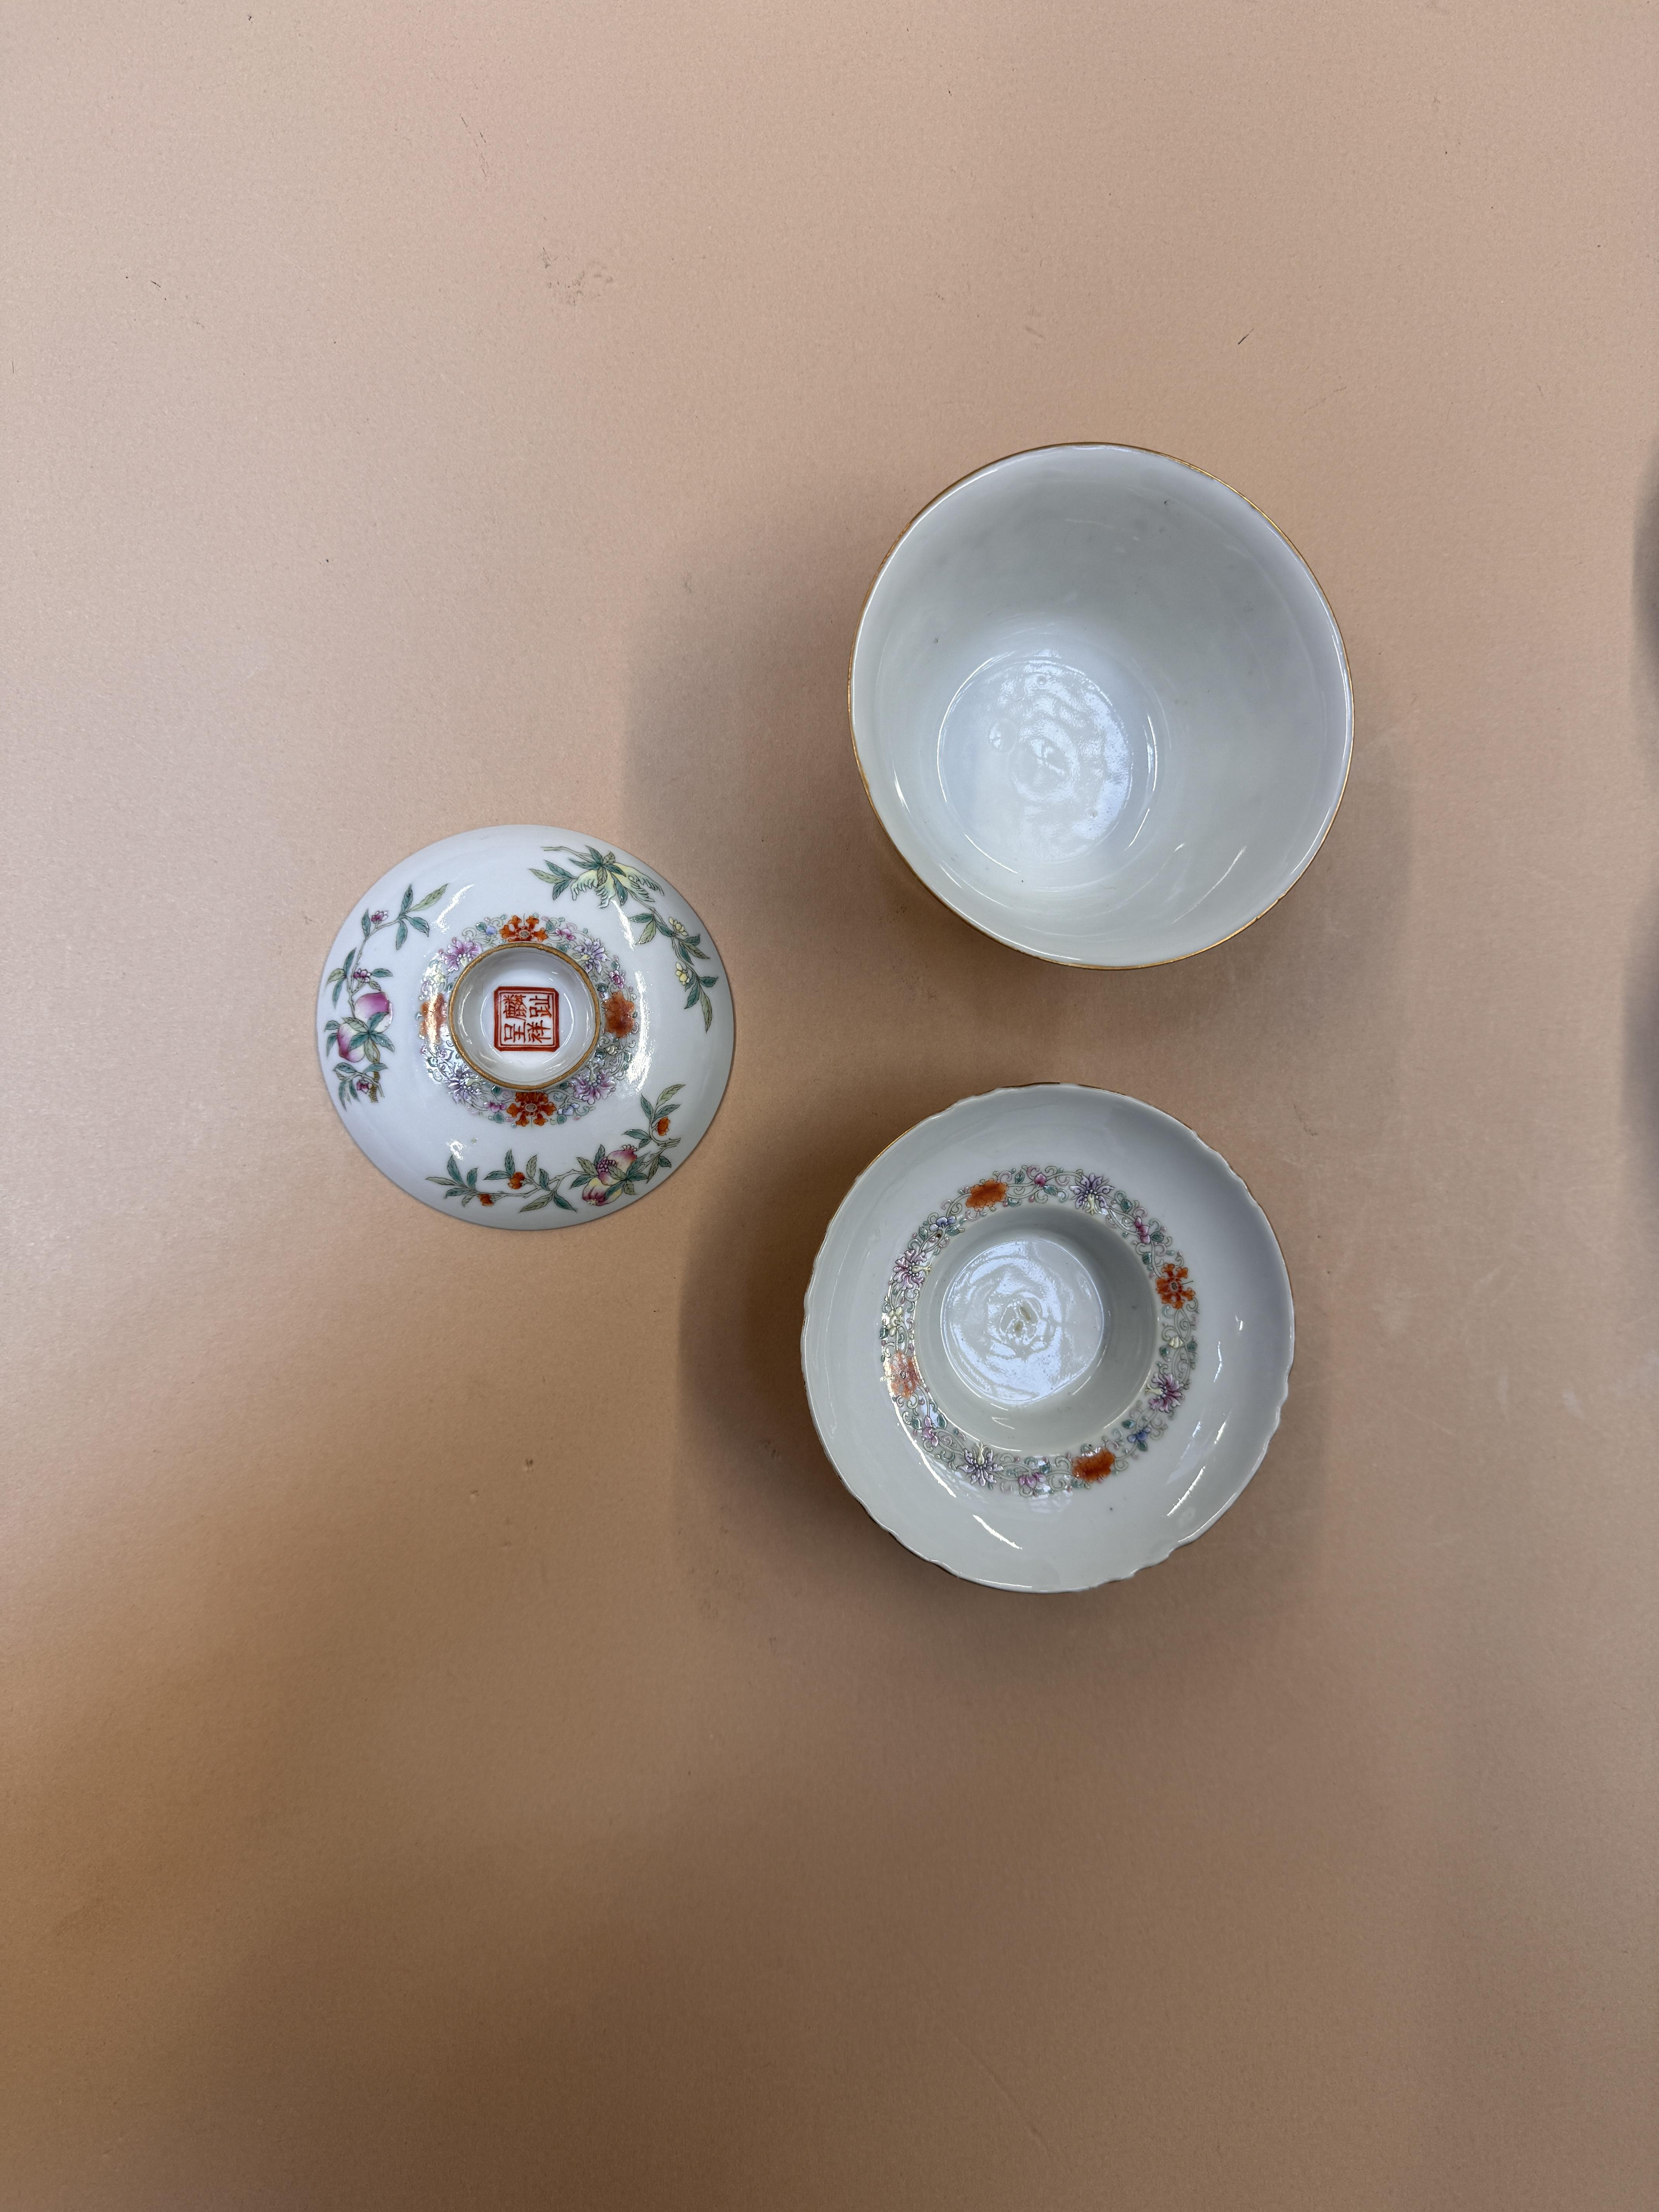 A PAIR OF CHINESE FAMILLE-ROSE CUPS, COVERS AND STANDS 民國時期 粉彩嬰戲圖蓋盌一對 《麟指呈祥》款 - Image 39 of 44